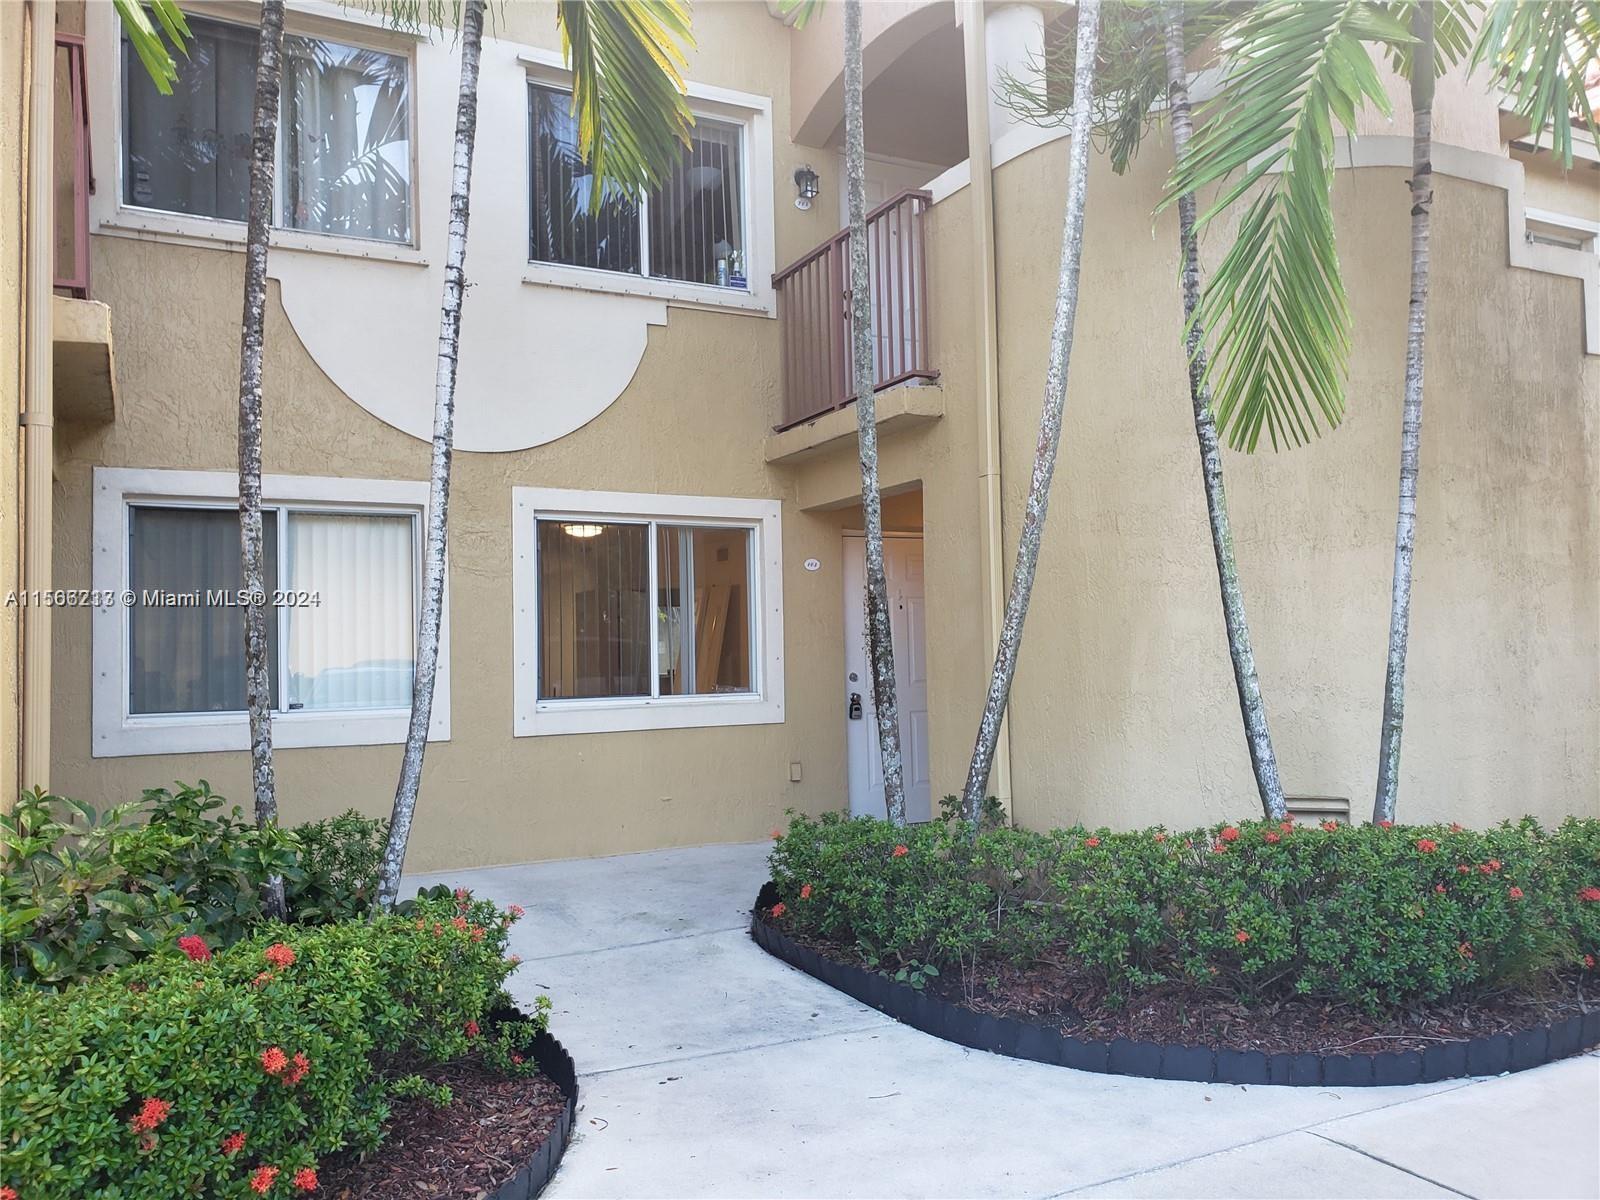 Photo of 7940 NW 6th St #103 in Pembroke Pines, FL